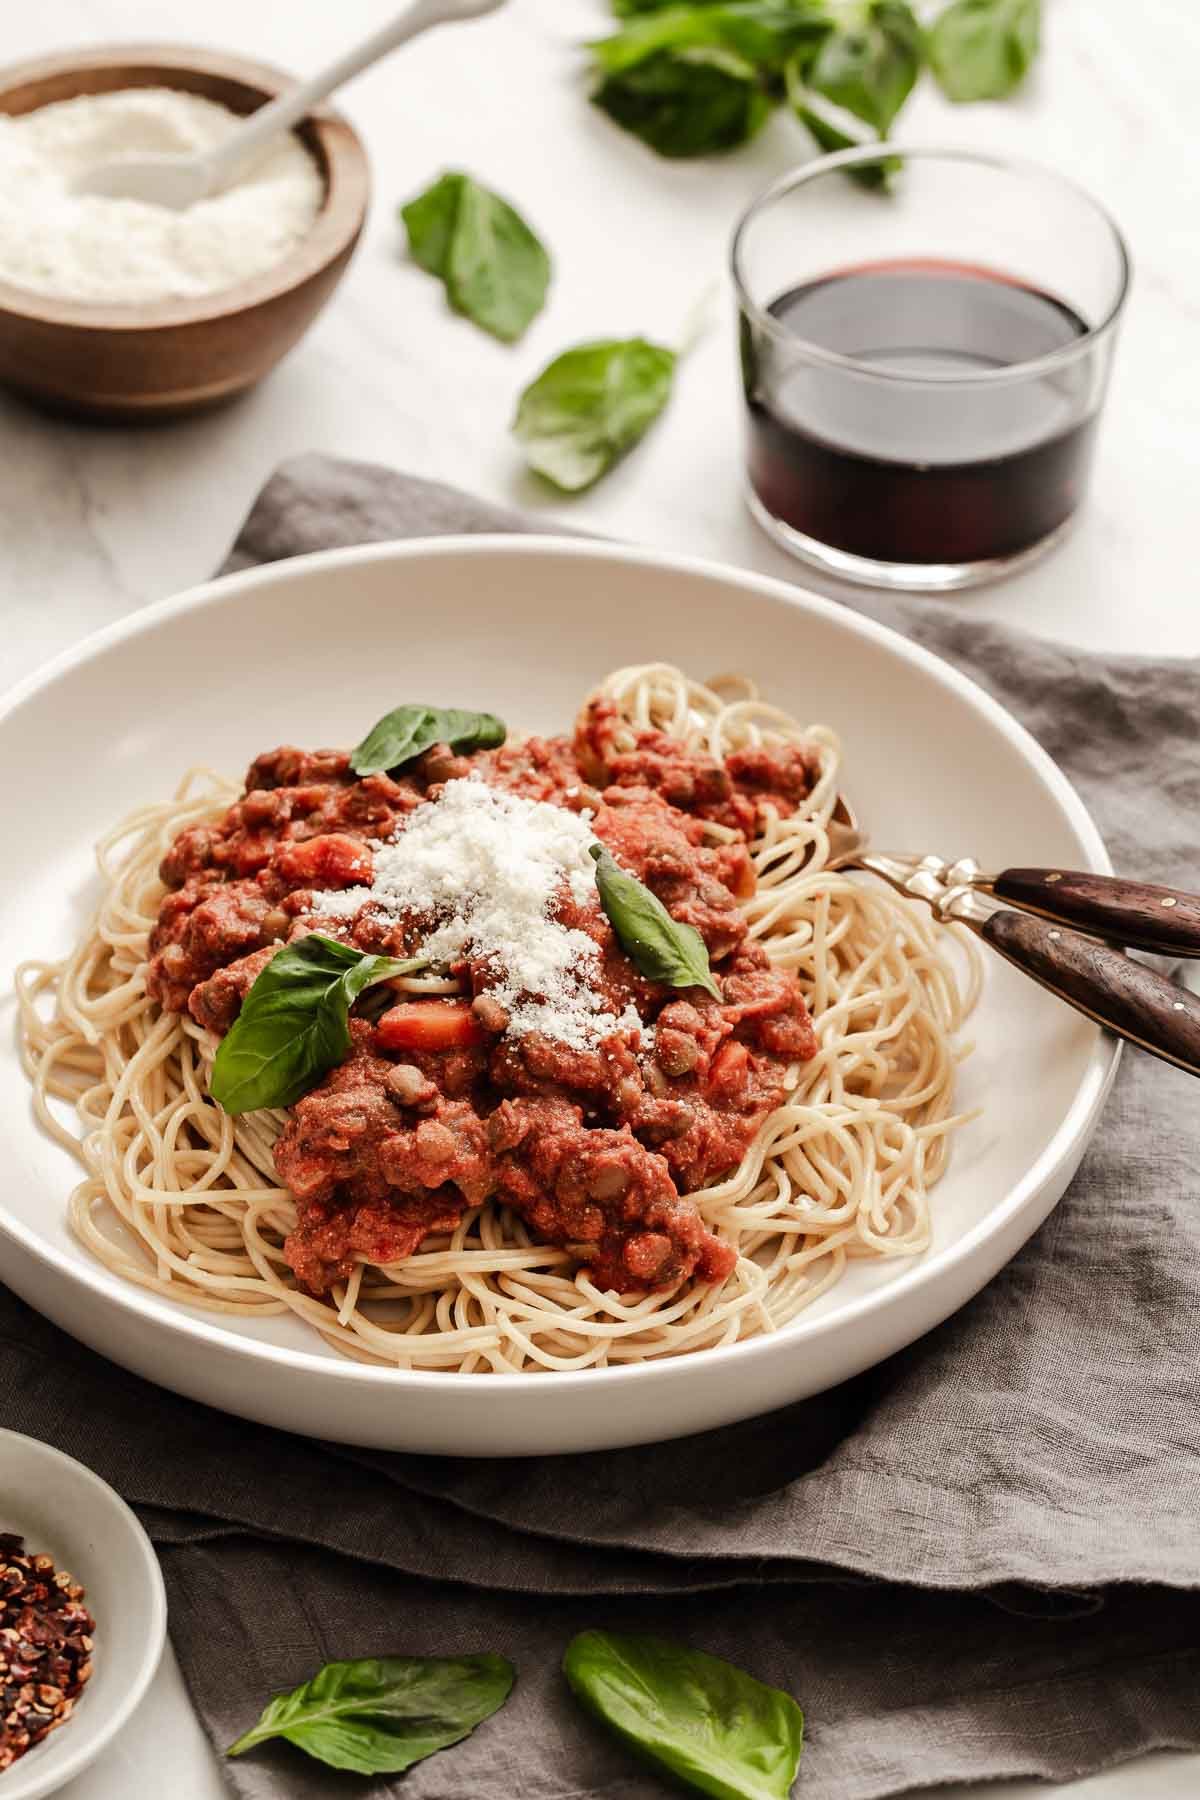 Vertical image of spaghetti and red lentil bolognese sauce on top.